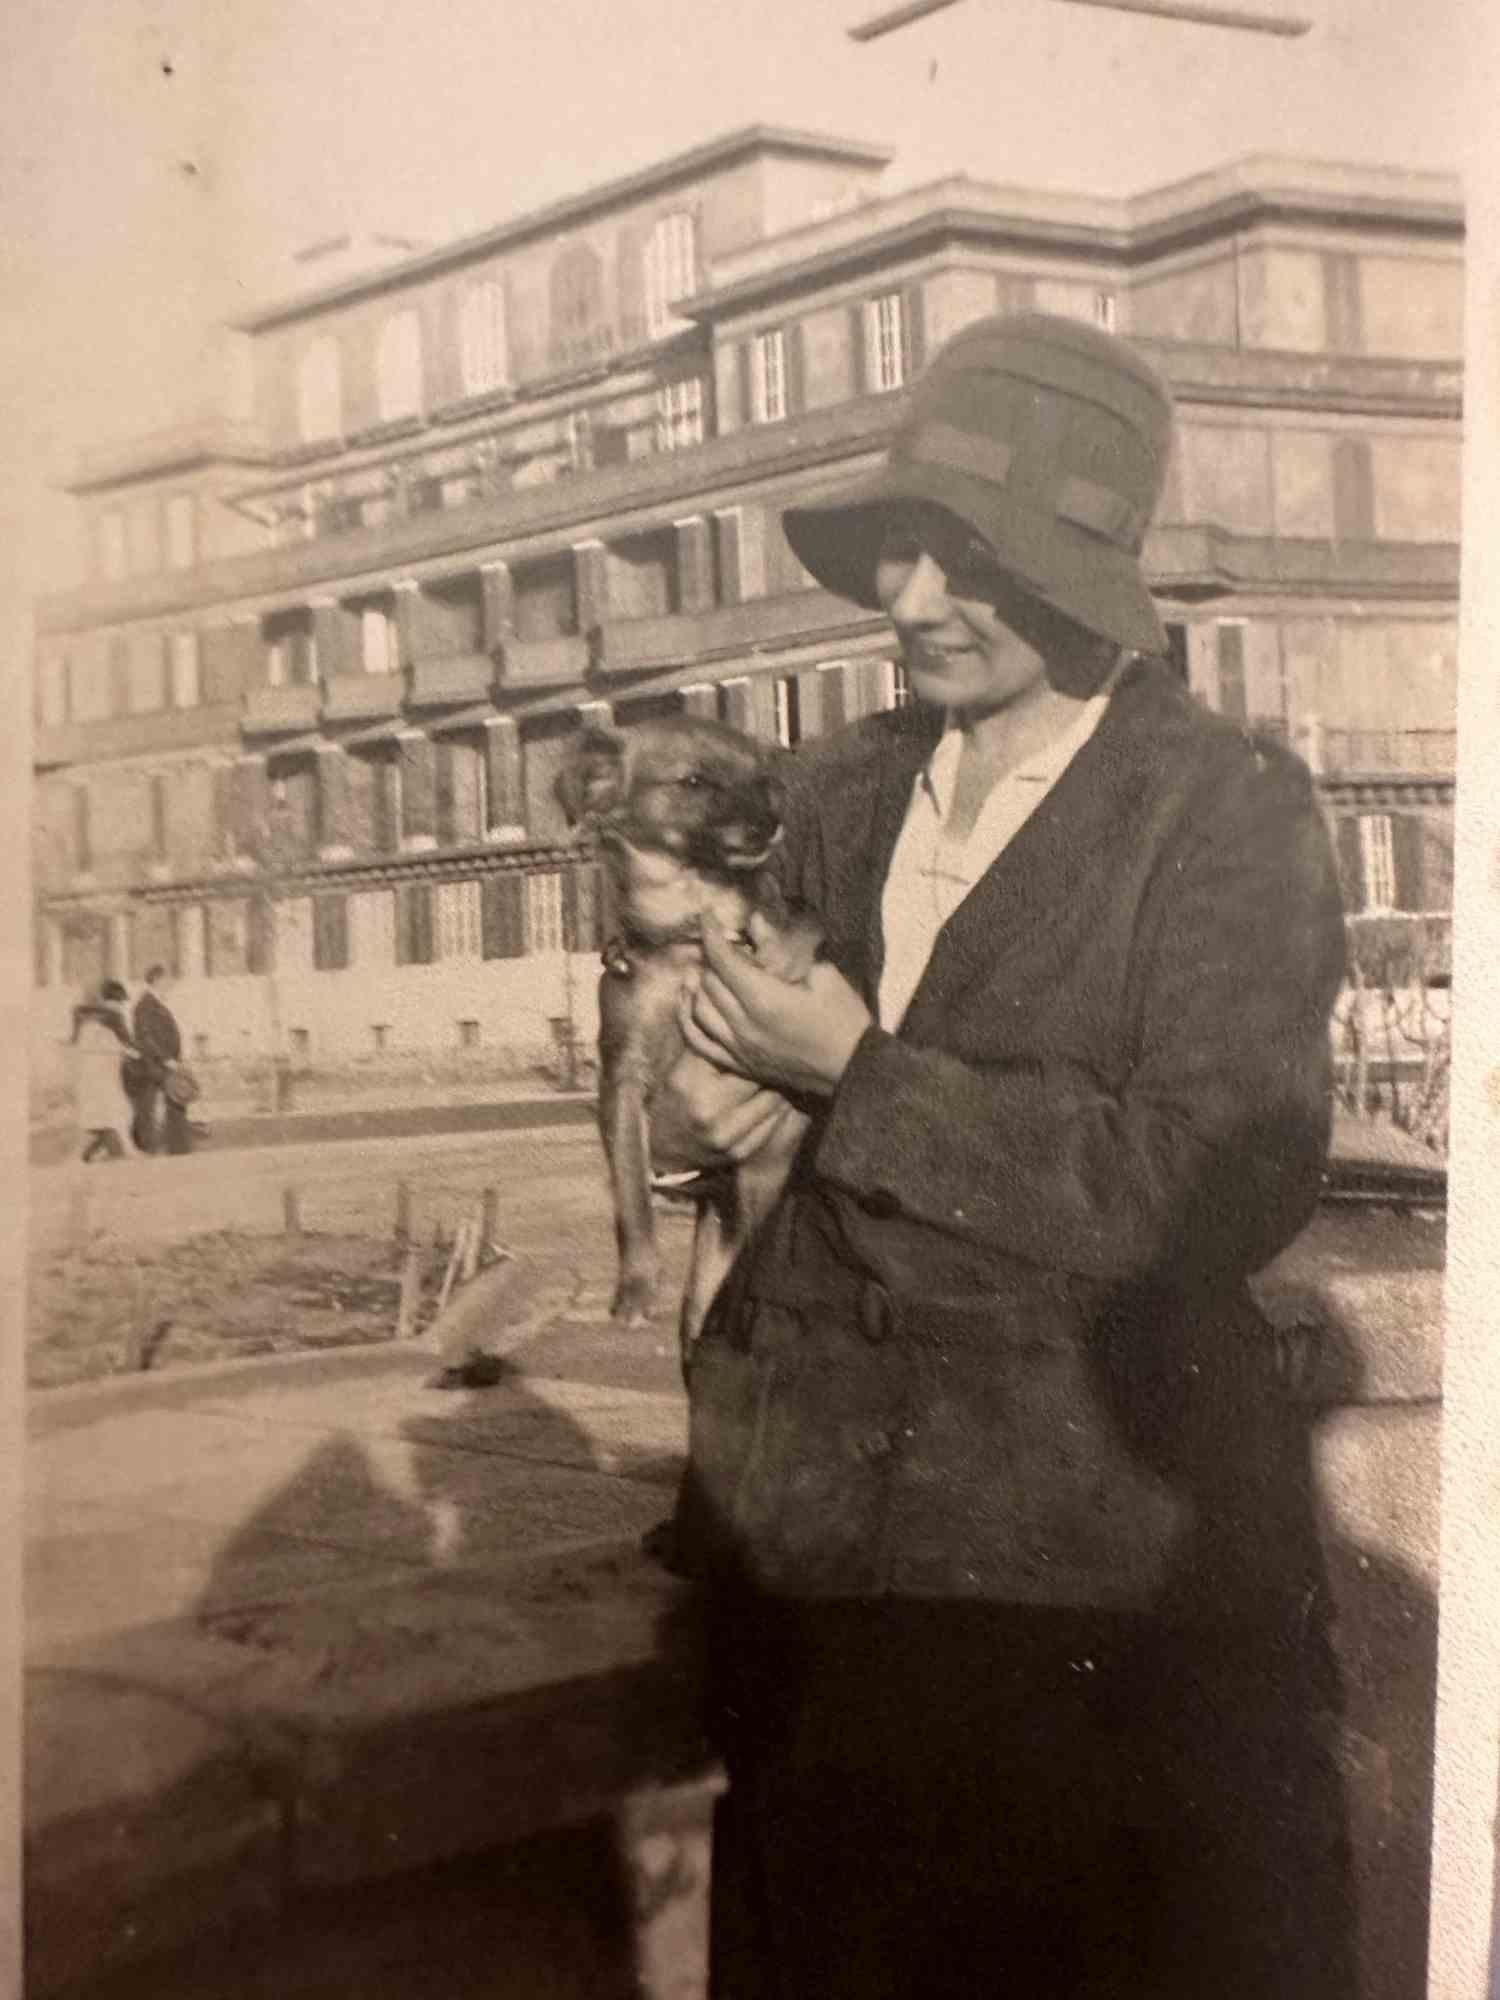 Unknown Figurative Photograph - The Old Days  Photo - Woman with Dog - Early 20th Century